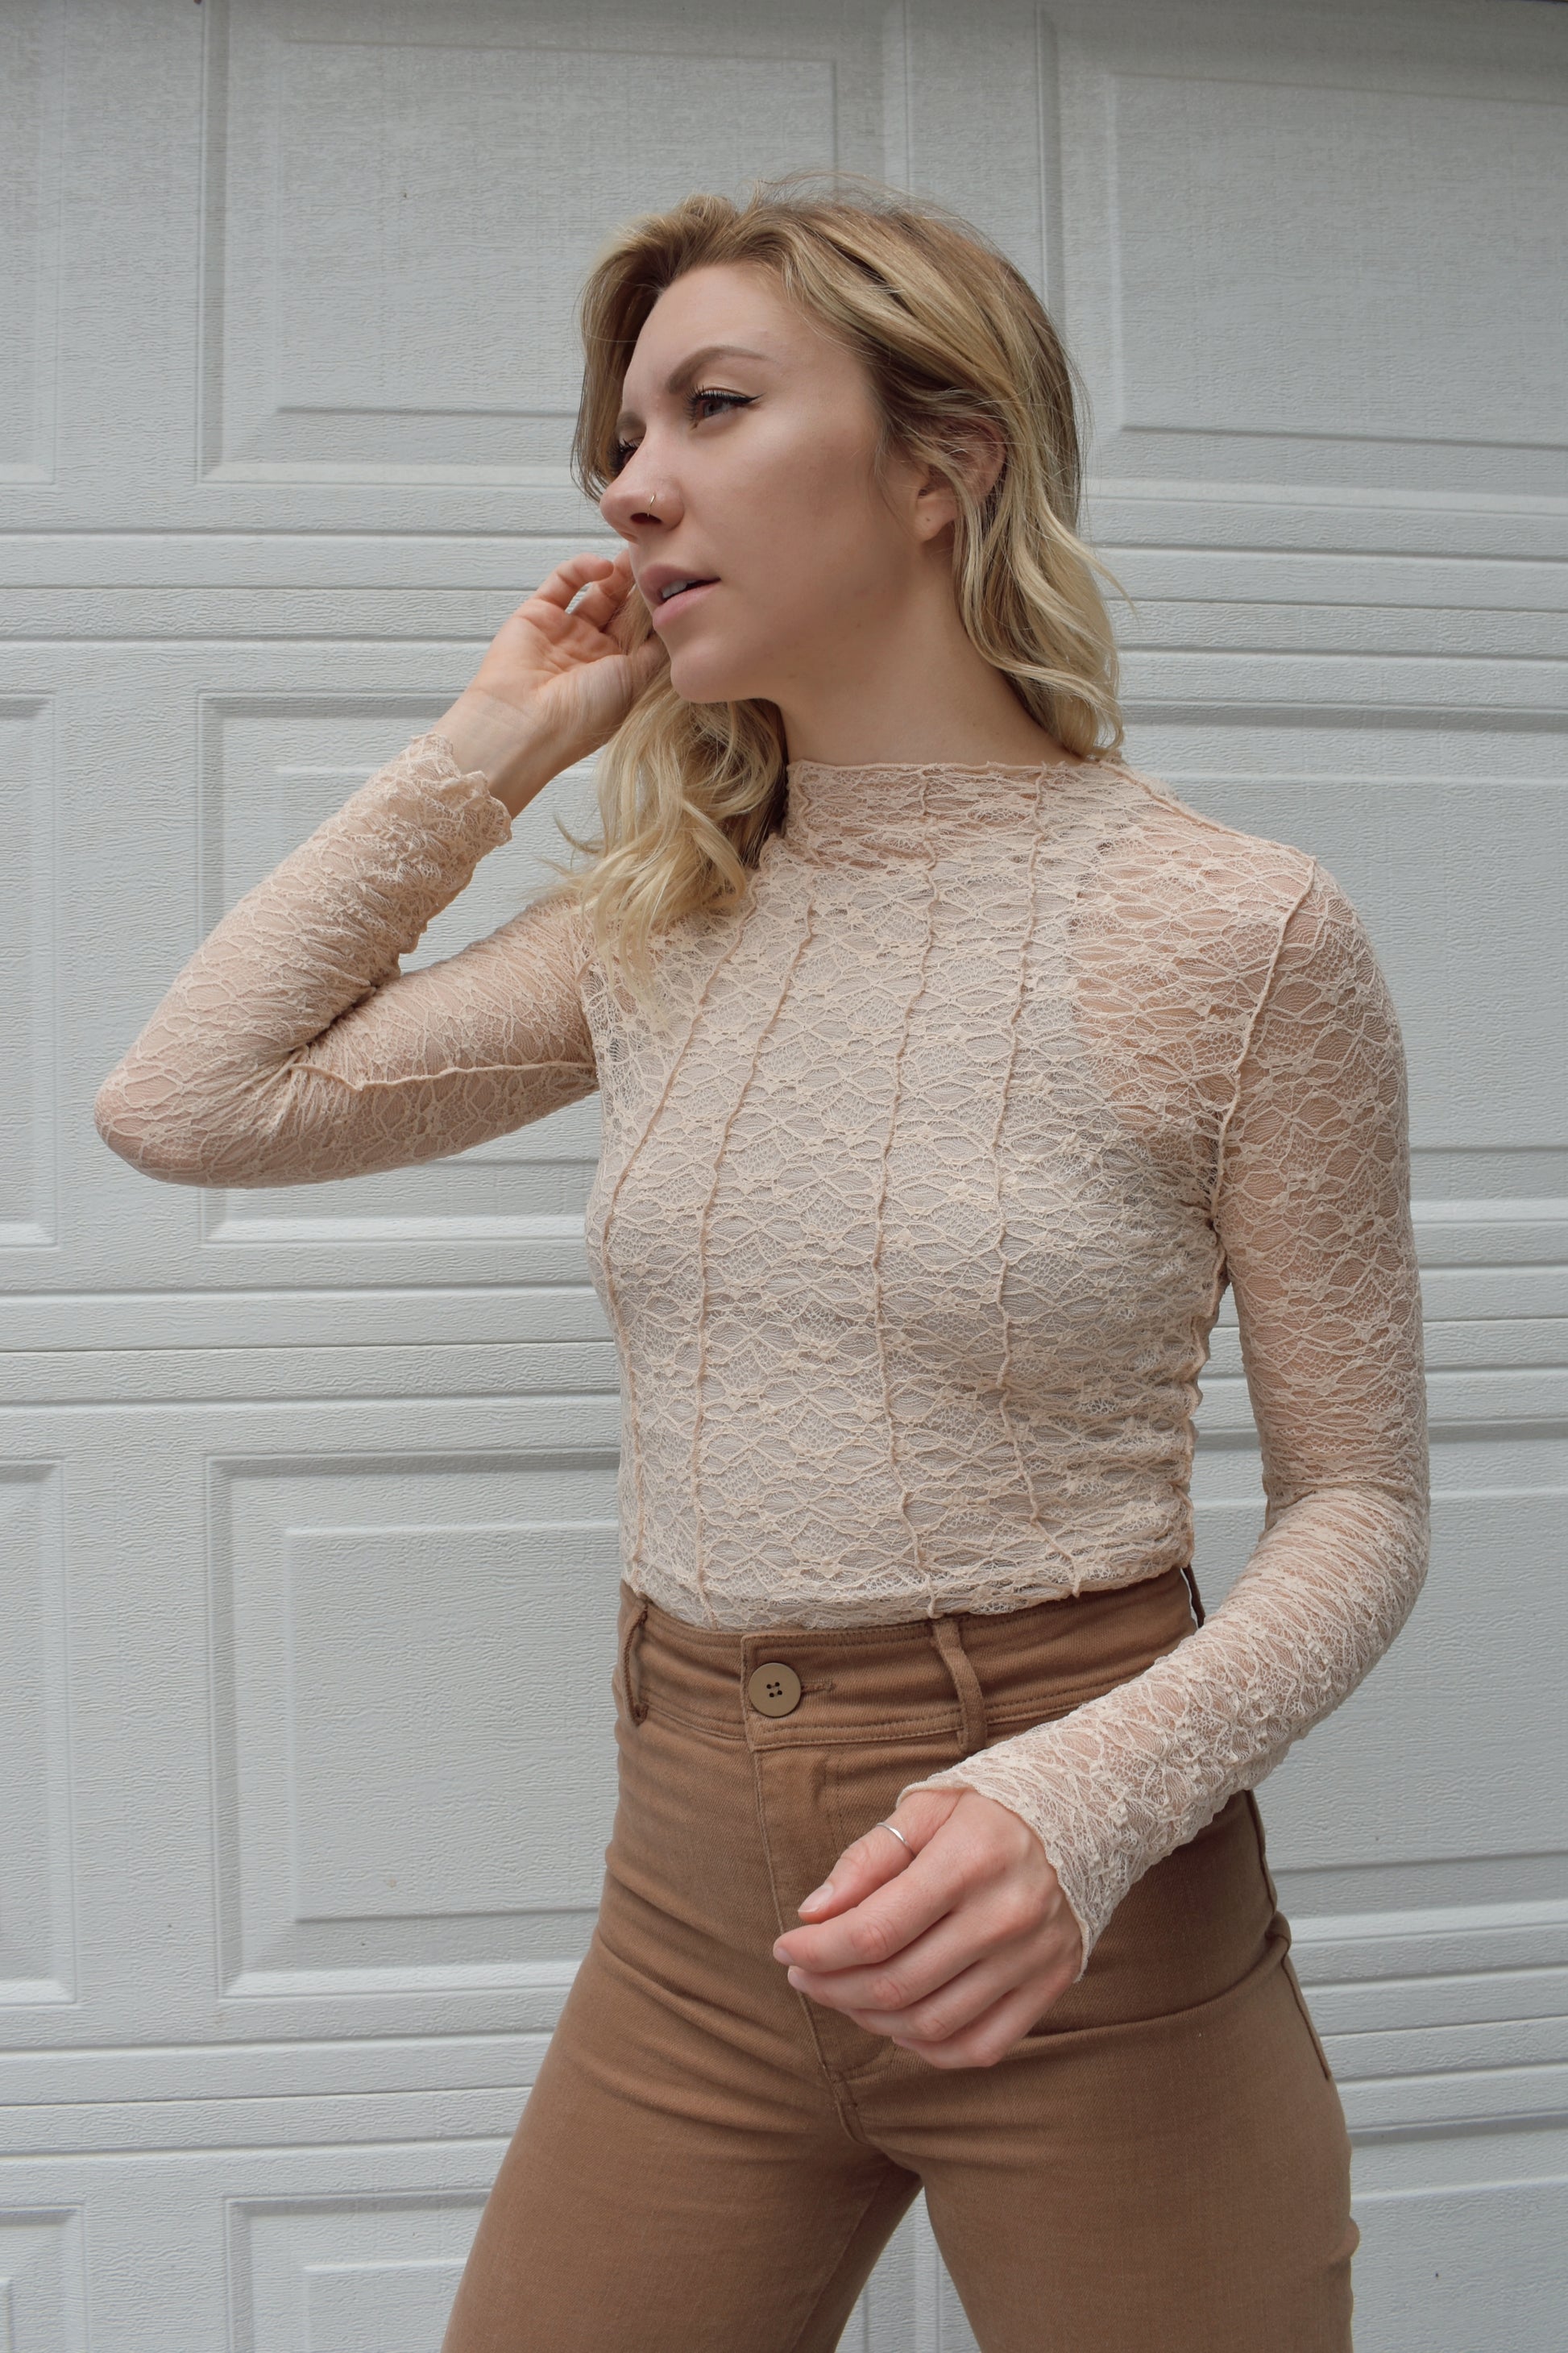 Illa Illa. Mod neck long sleeve sheer nude lace top with exposed seam detail along the front and back. Full length.